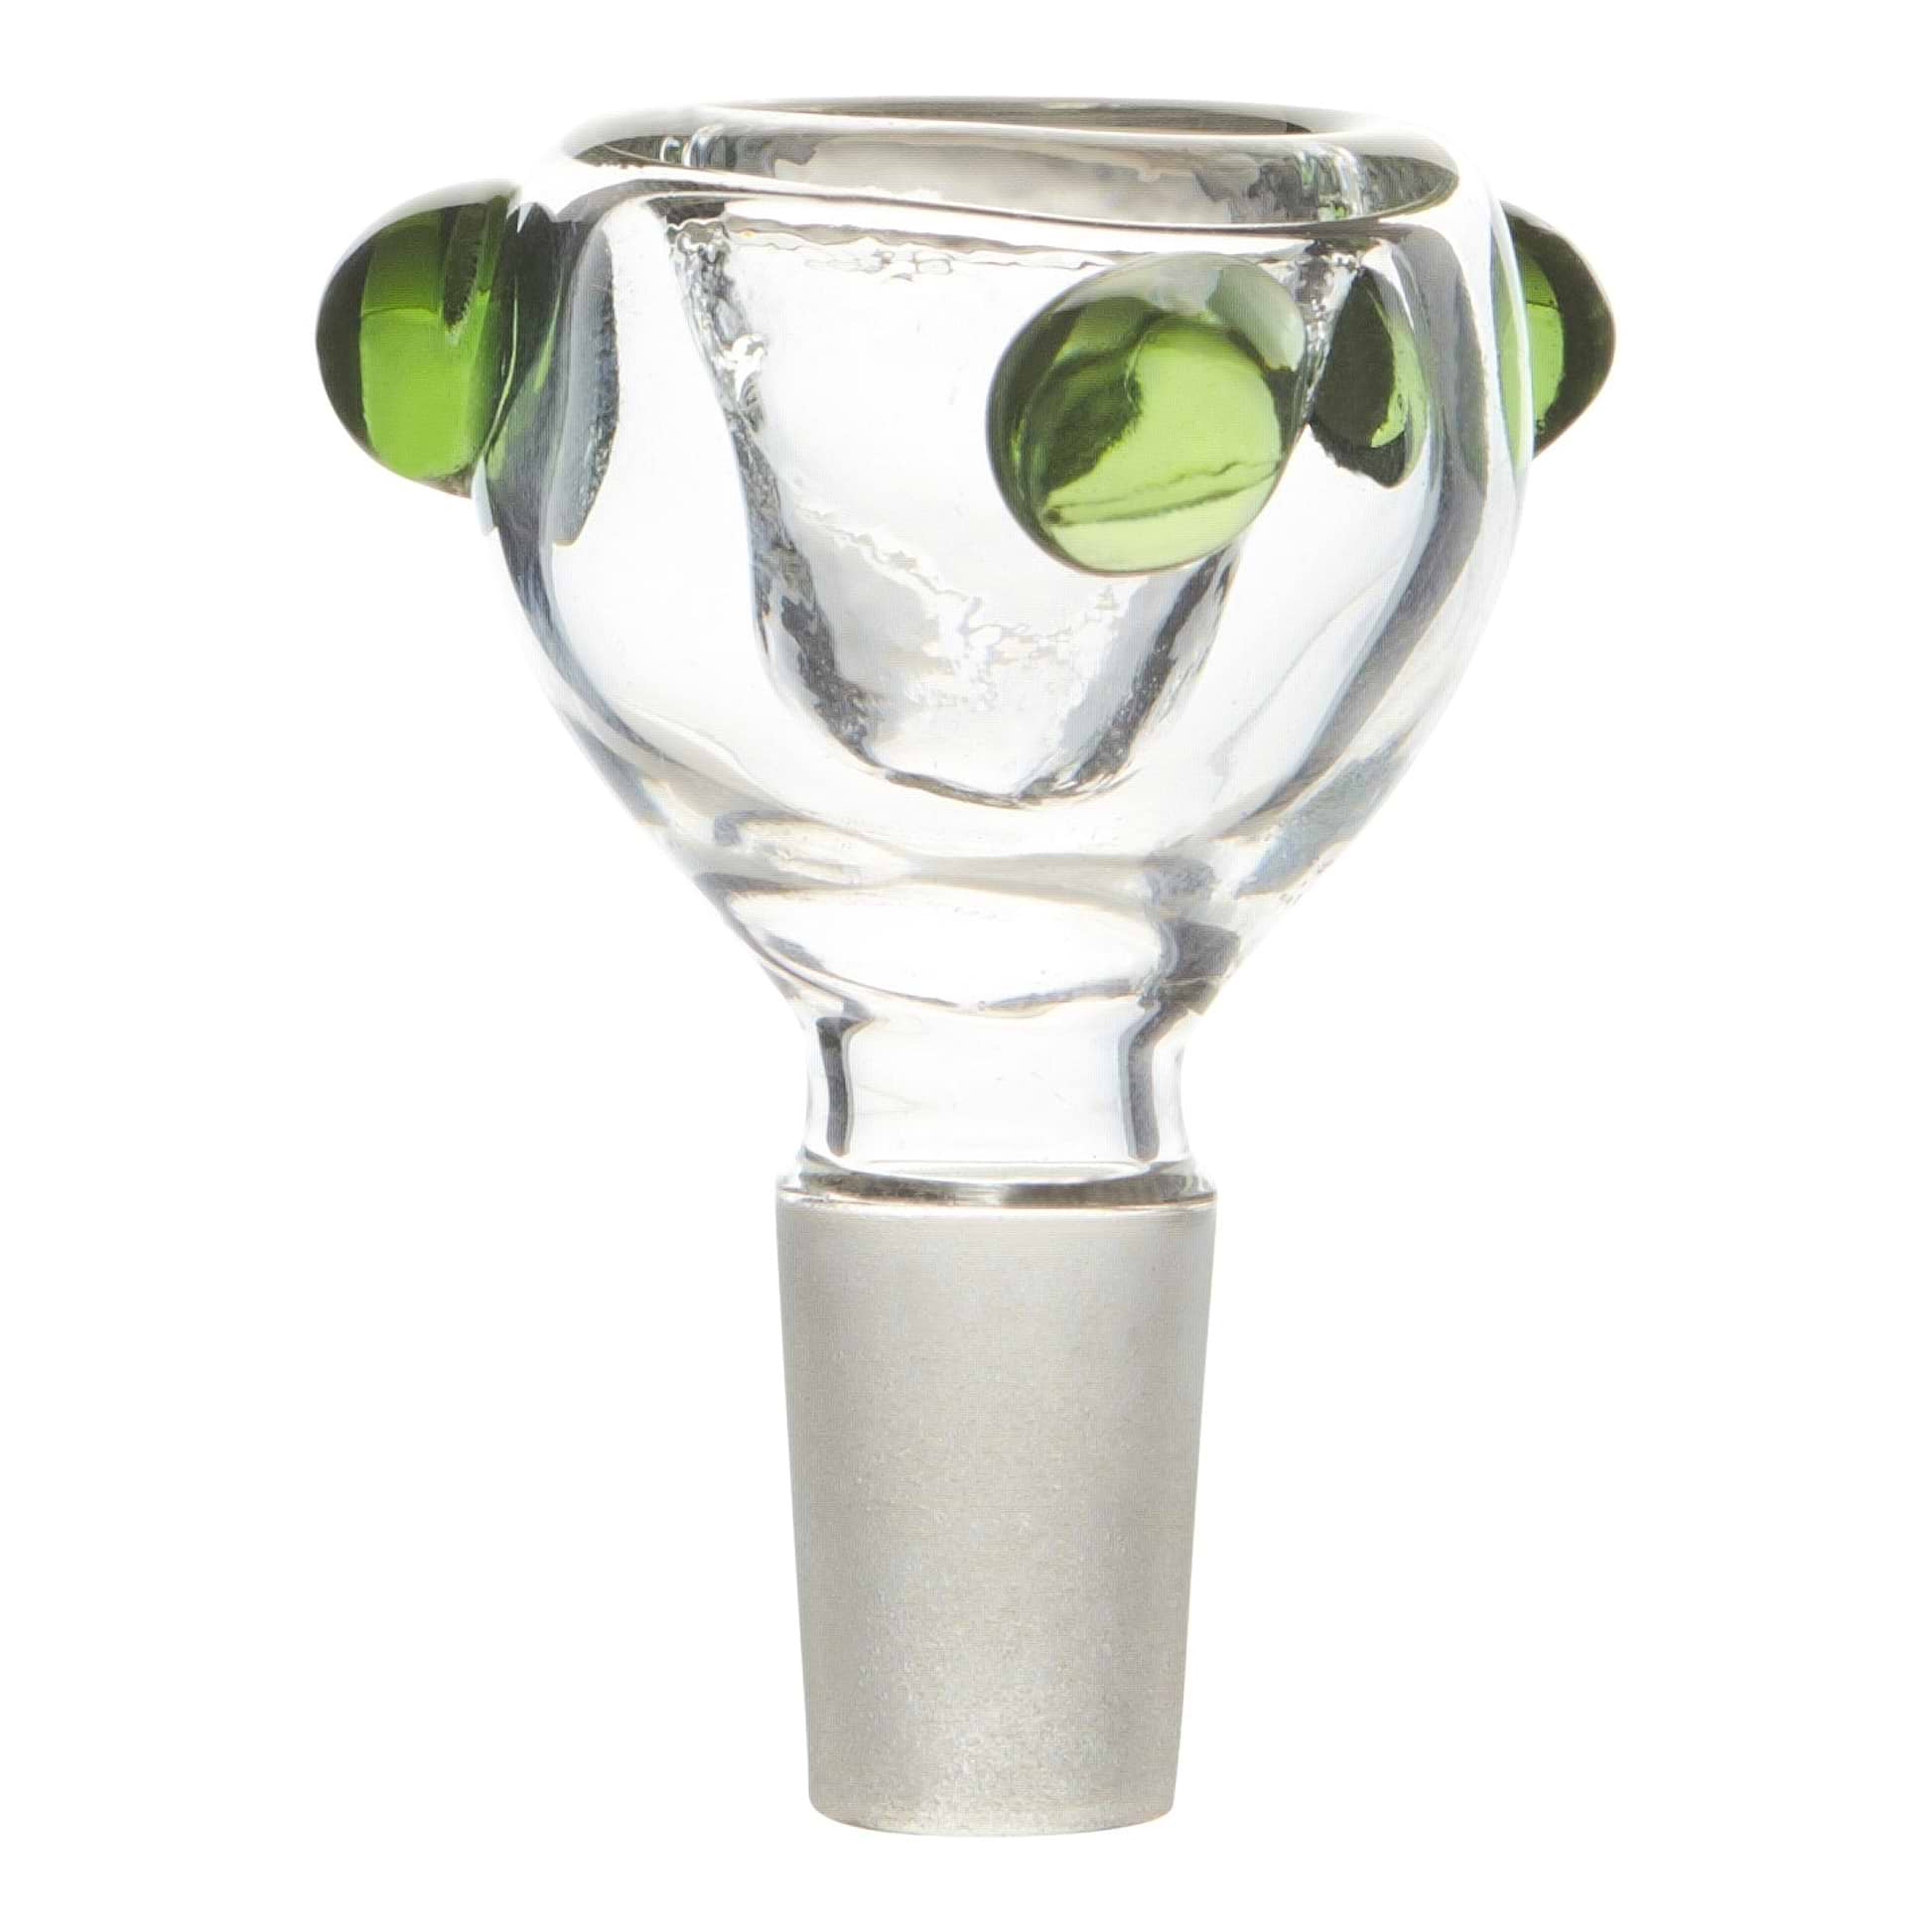 Close up shot of clear glass bowl smoking accessory for 14mm male joint with three green fingergrips 